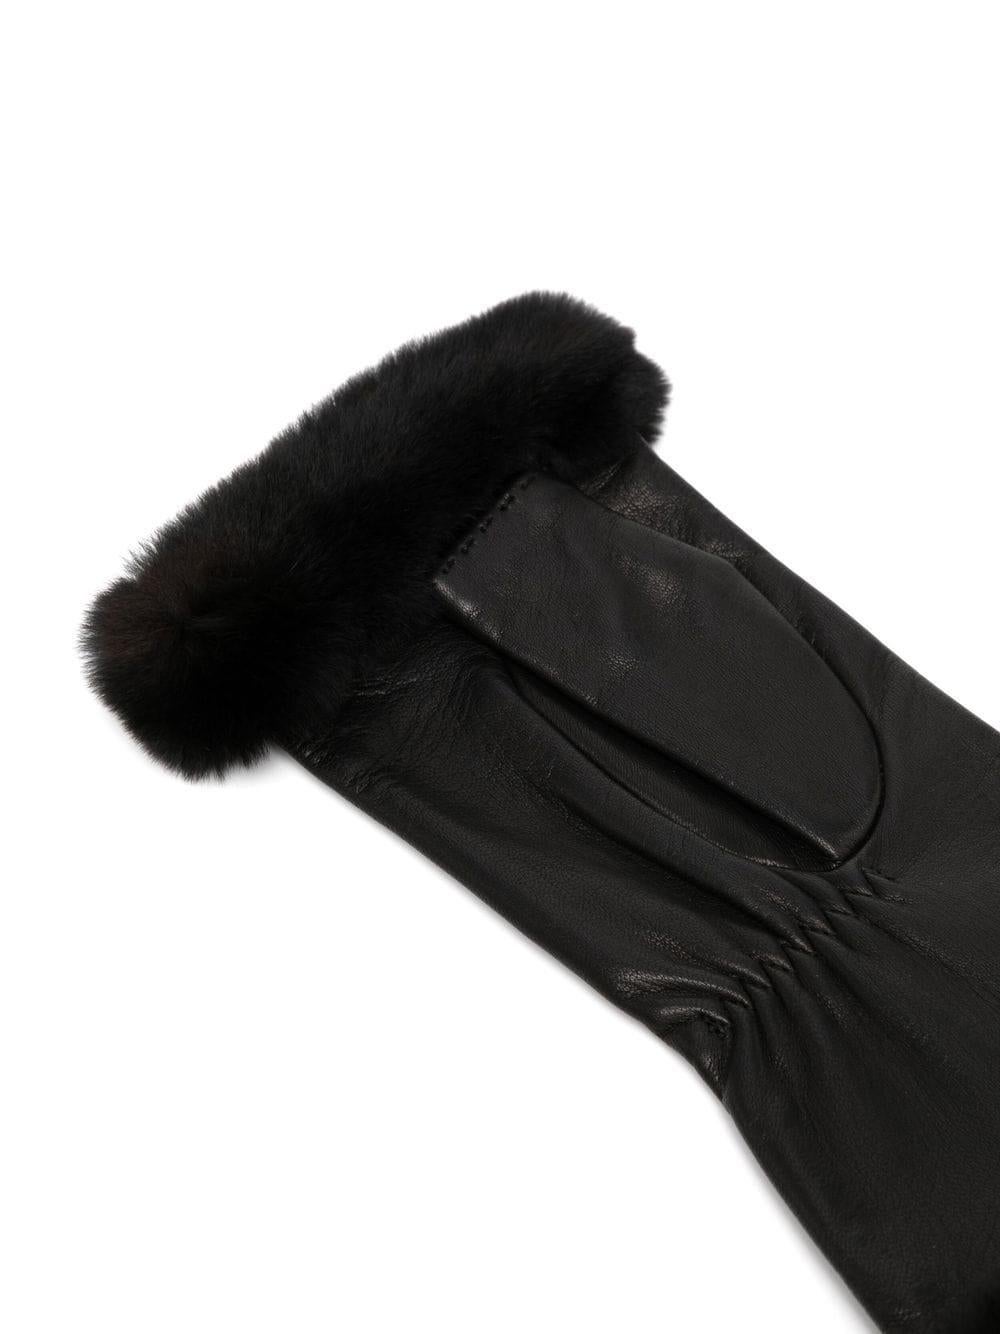 Exuding the effortless luxury ofHermes, this pair of pre-owned gloves are both elegant and timeless. Handcrafted from a smooth, soft-to-the-touch, leather, these statement accessories showcase a black exterior with faux-fur trimming and gathered